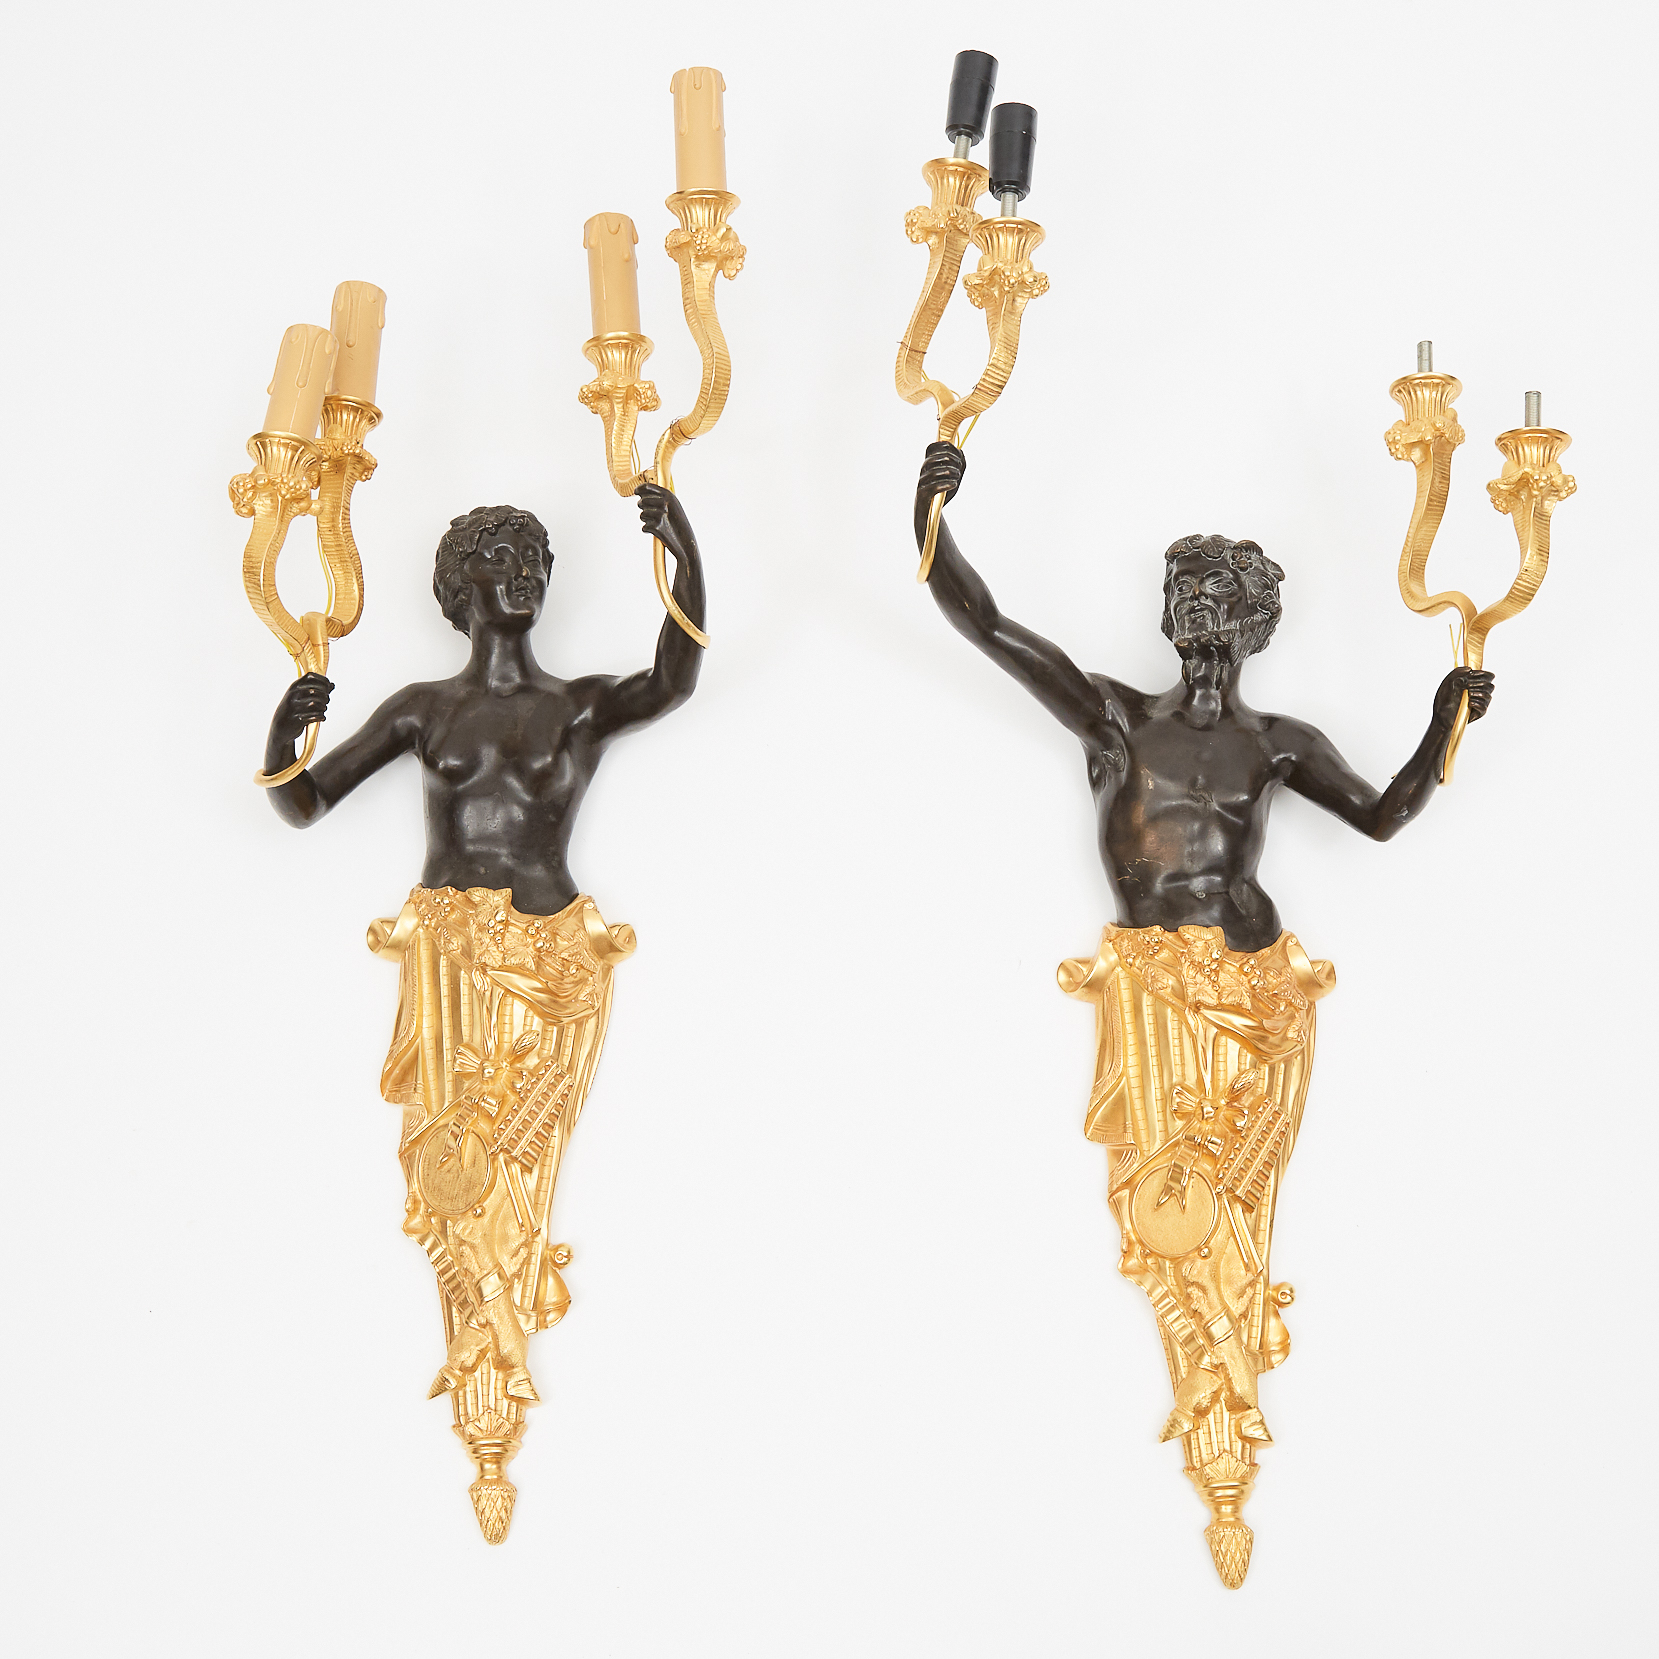 Large Pair of French Gilt and Patinated Bronze Figural Wall Sconces, 20th century